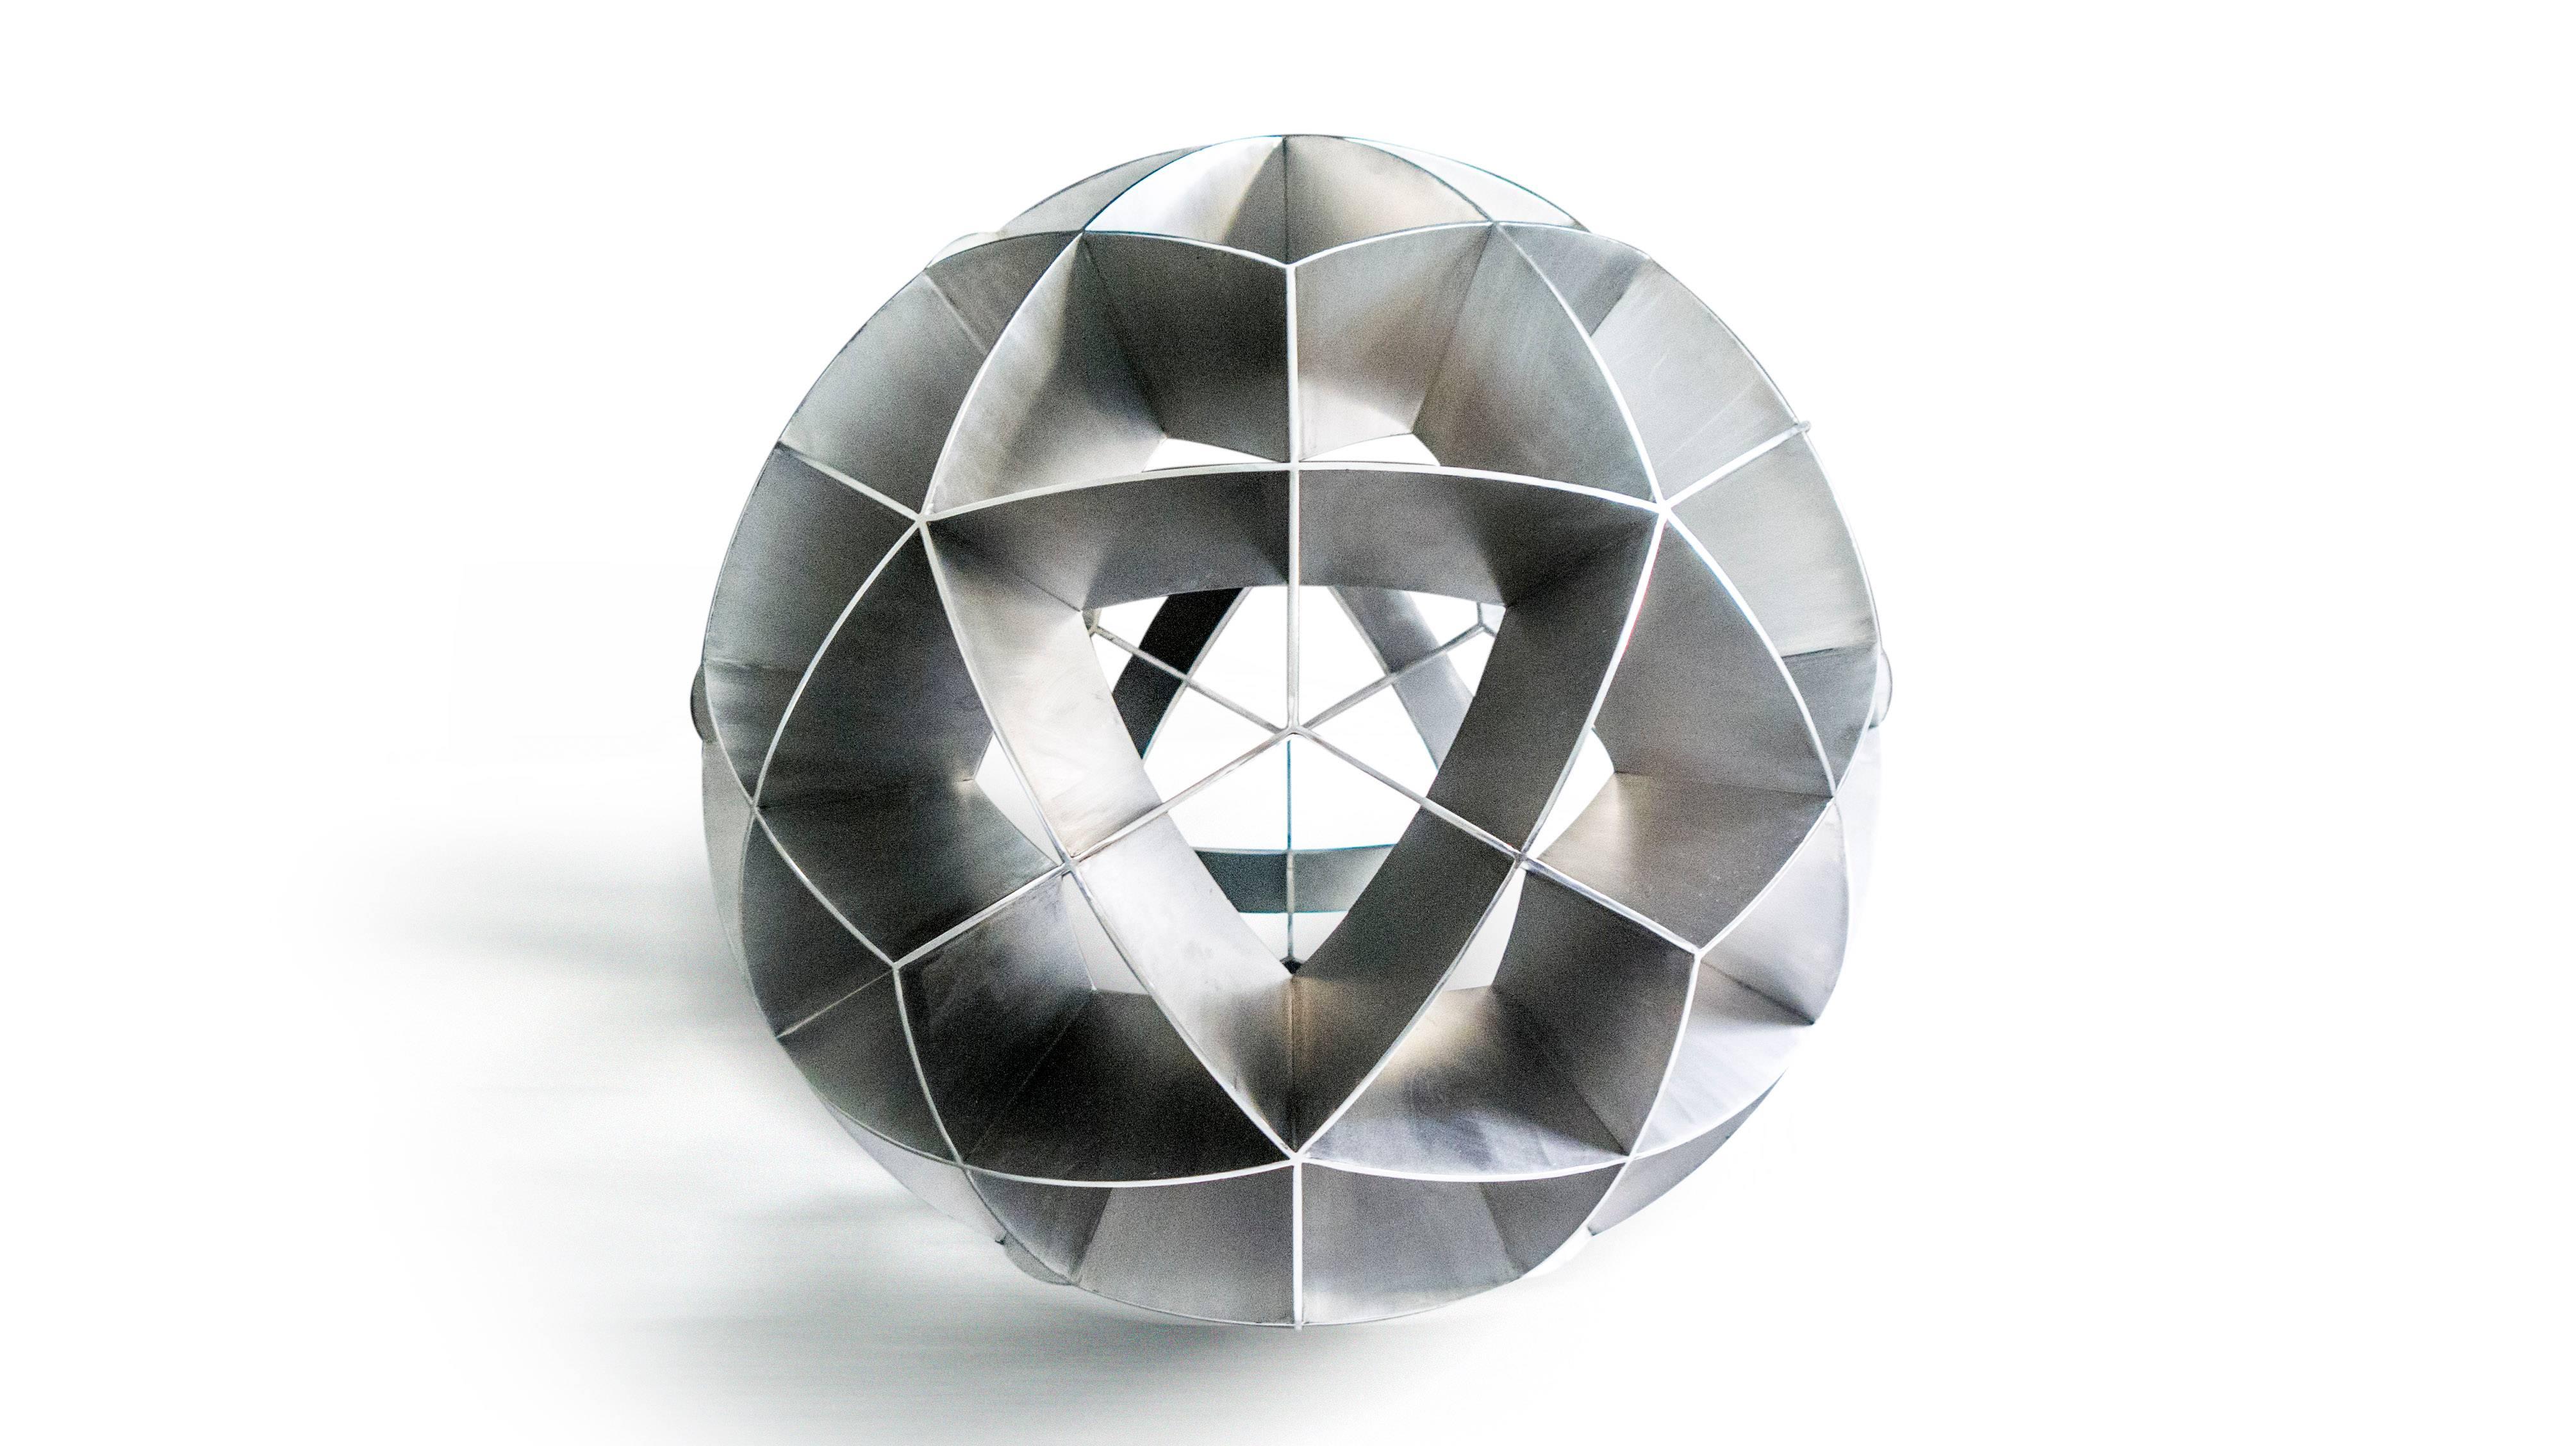 This is a one of a kind stainless steel sculpture created by renowned Mexican designer Pedro Cerisola, whose work is in the permanent collection of the National Autonomous University Science Museum and has been exhibited in the Franz Mayer Design